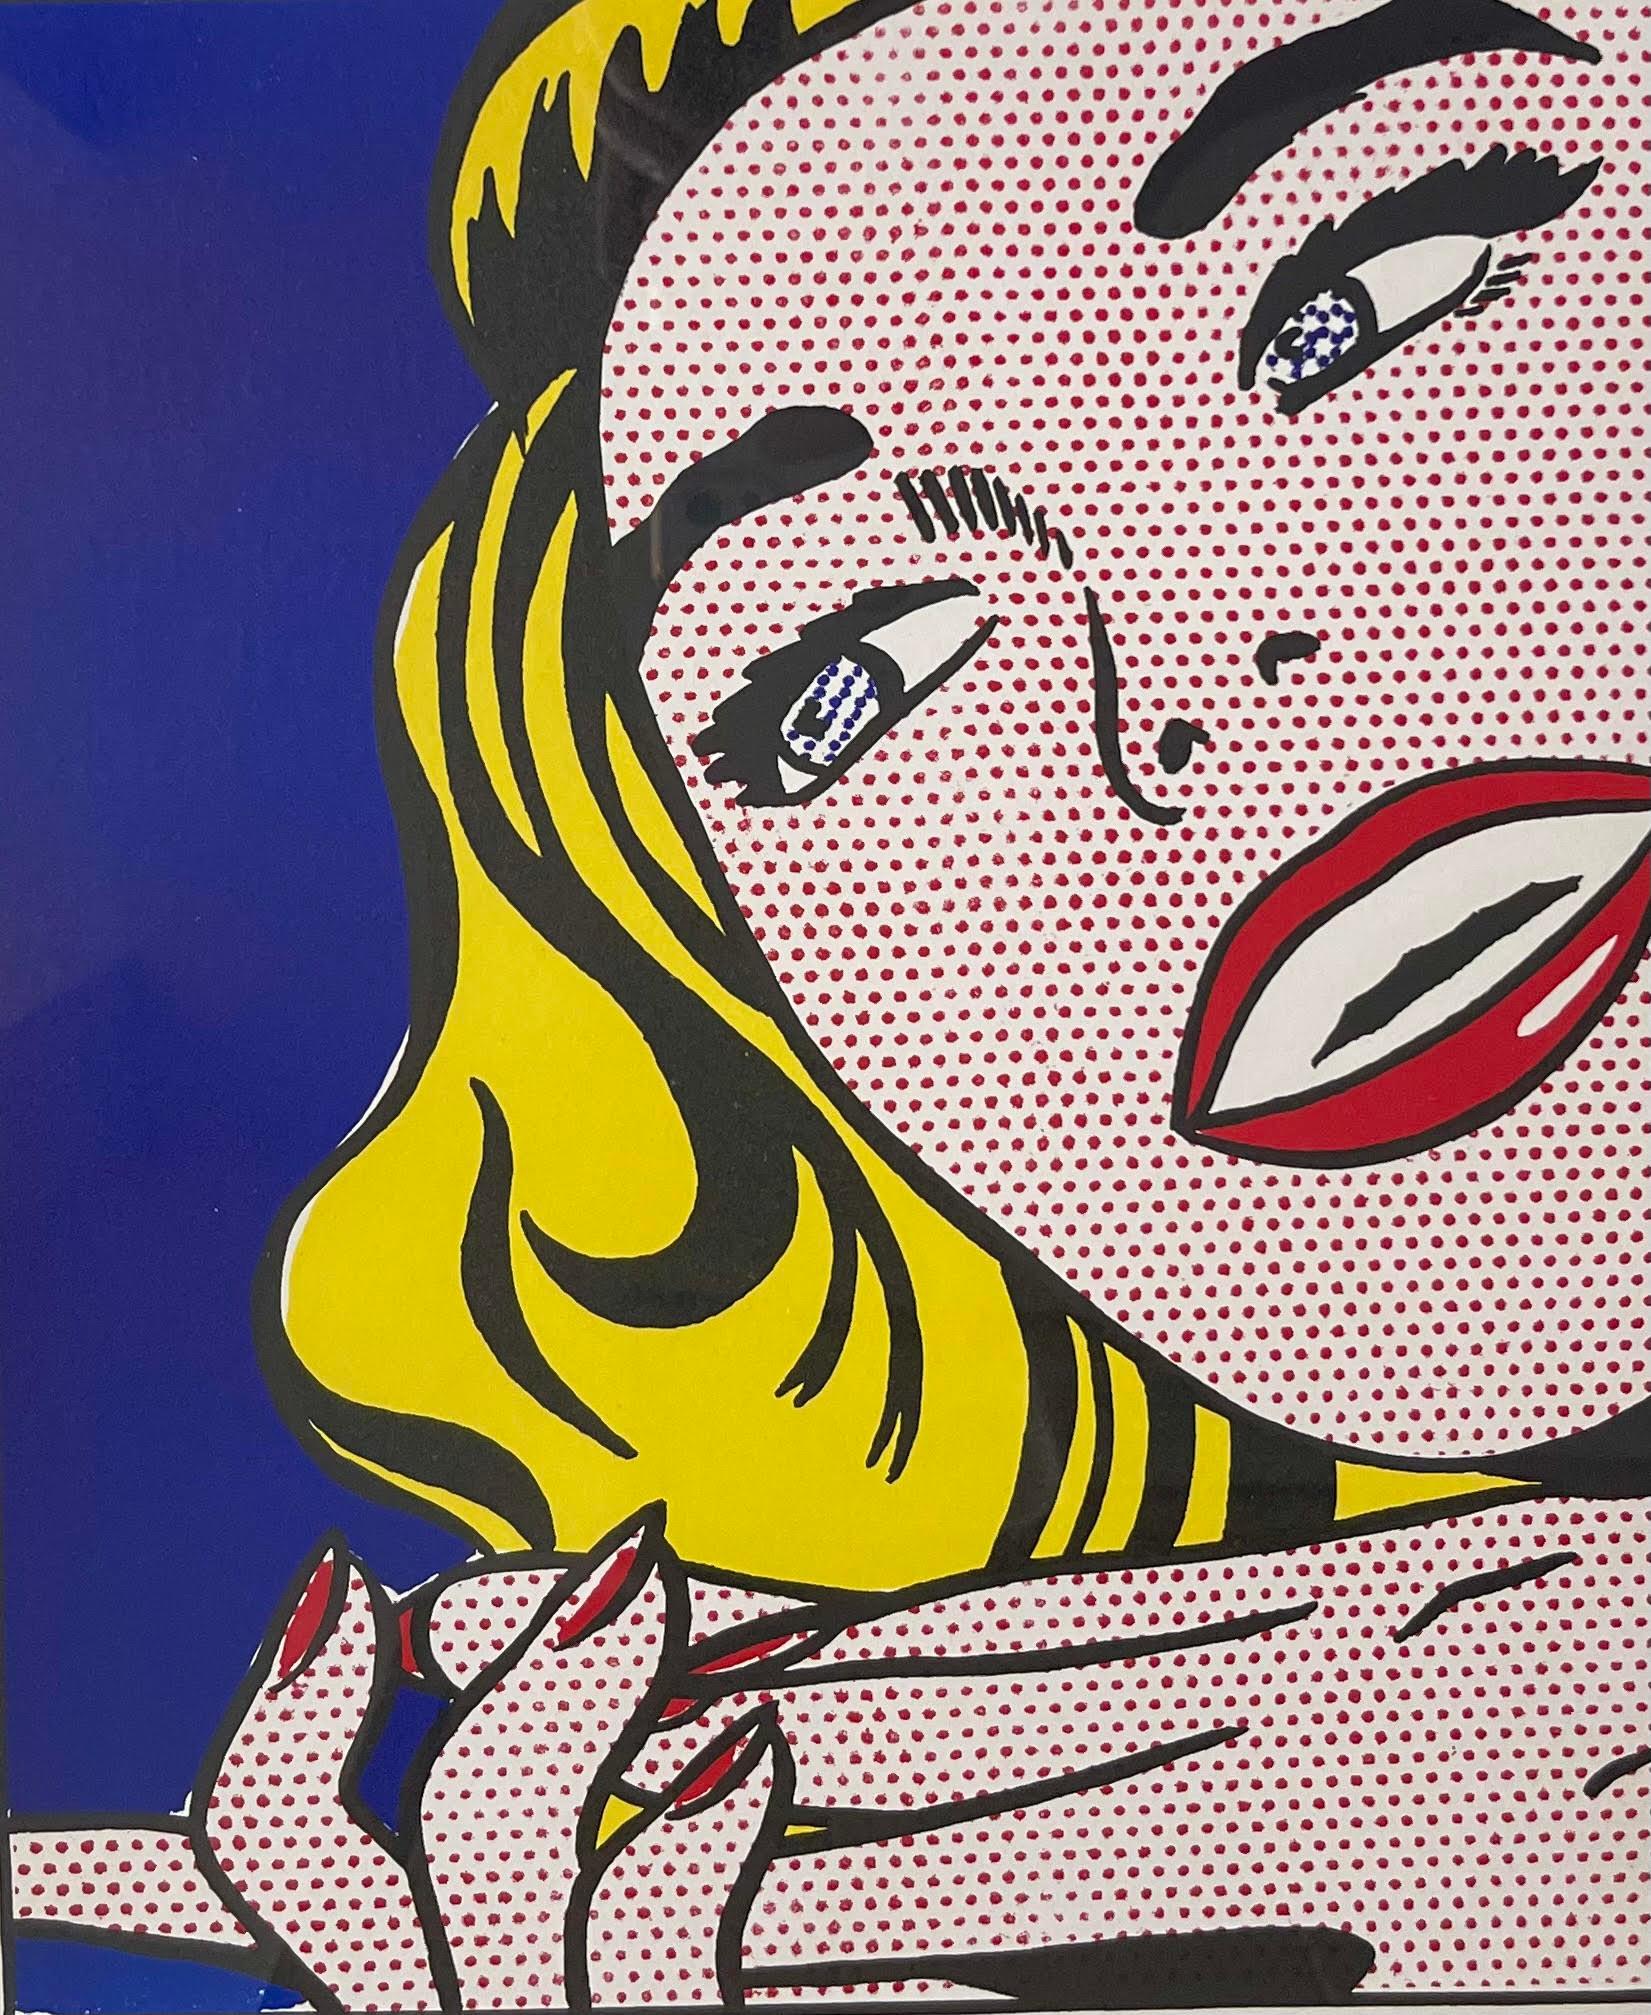 Roy Lichtenstein
Girl With Spraycan (Deluxe hand signed edition of the 1 Cent Life Portfolio, from the estate of artist Robert Indiana), 1964
Limited Edition of 100 (#85/100) 
Lithograph splayed across two sheets on wove paper (Hand signed by Roy